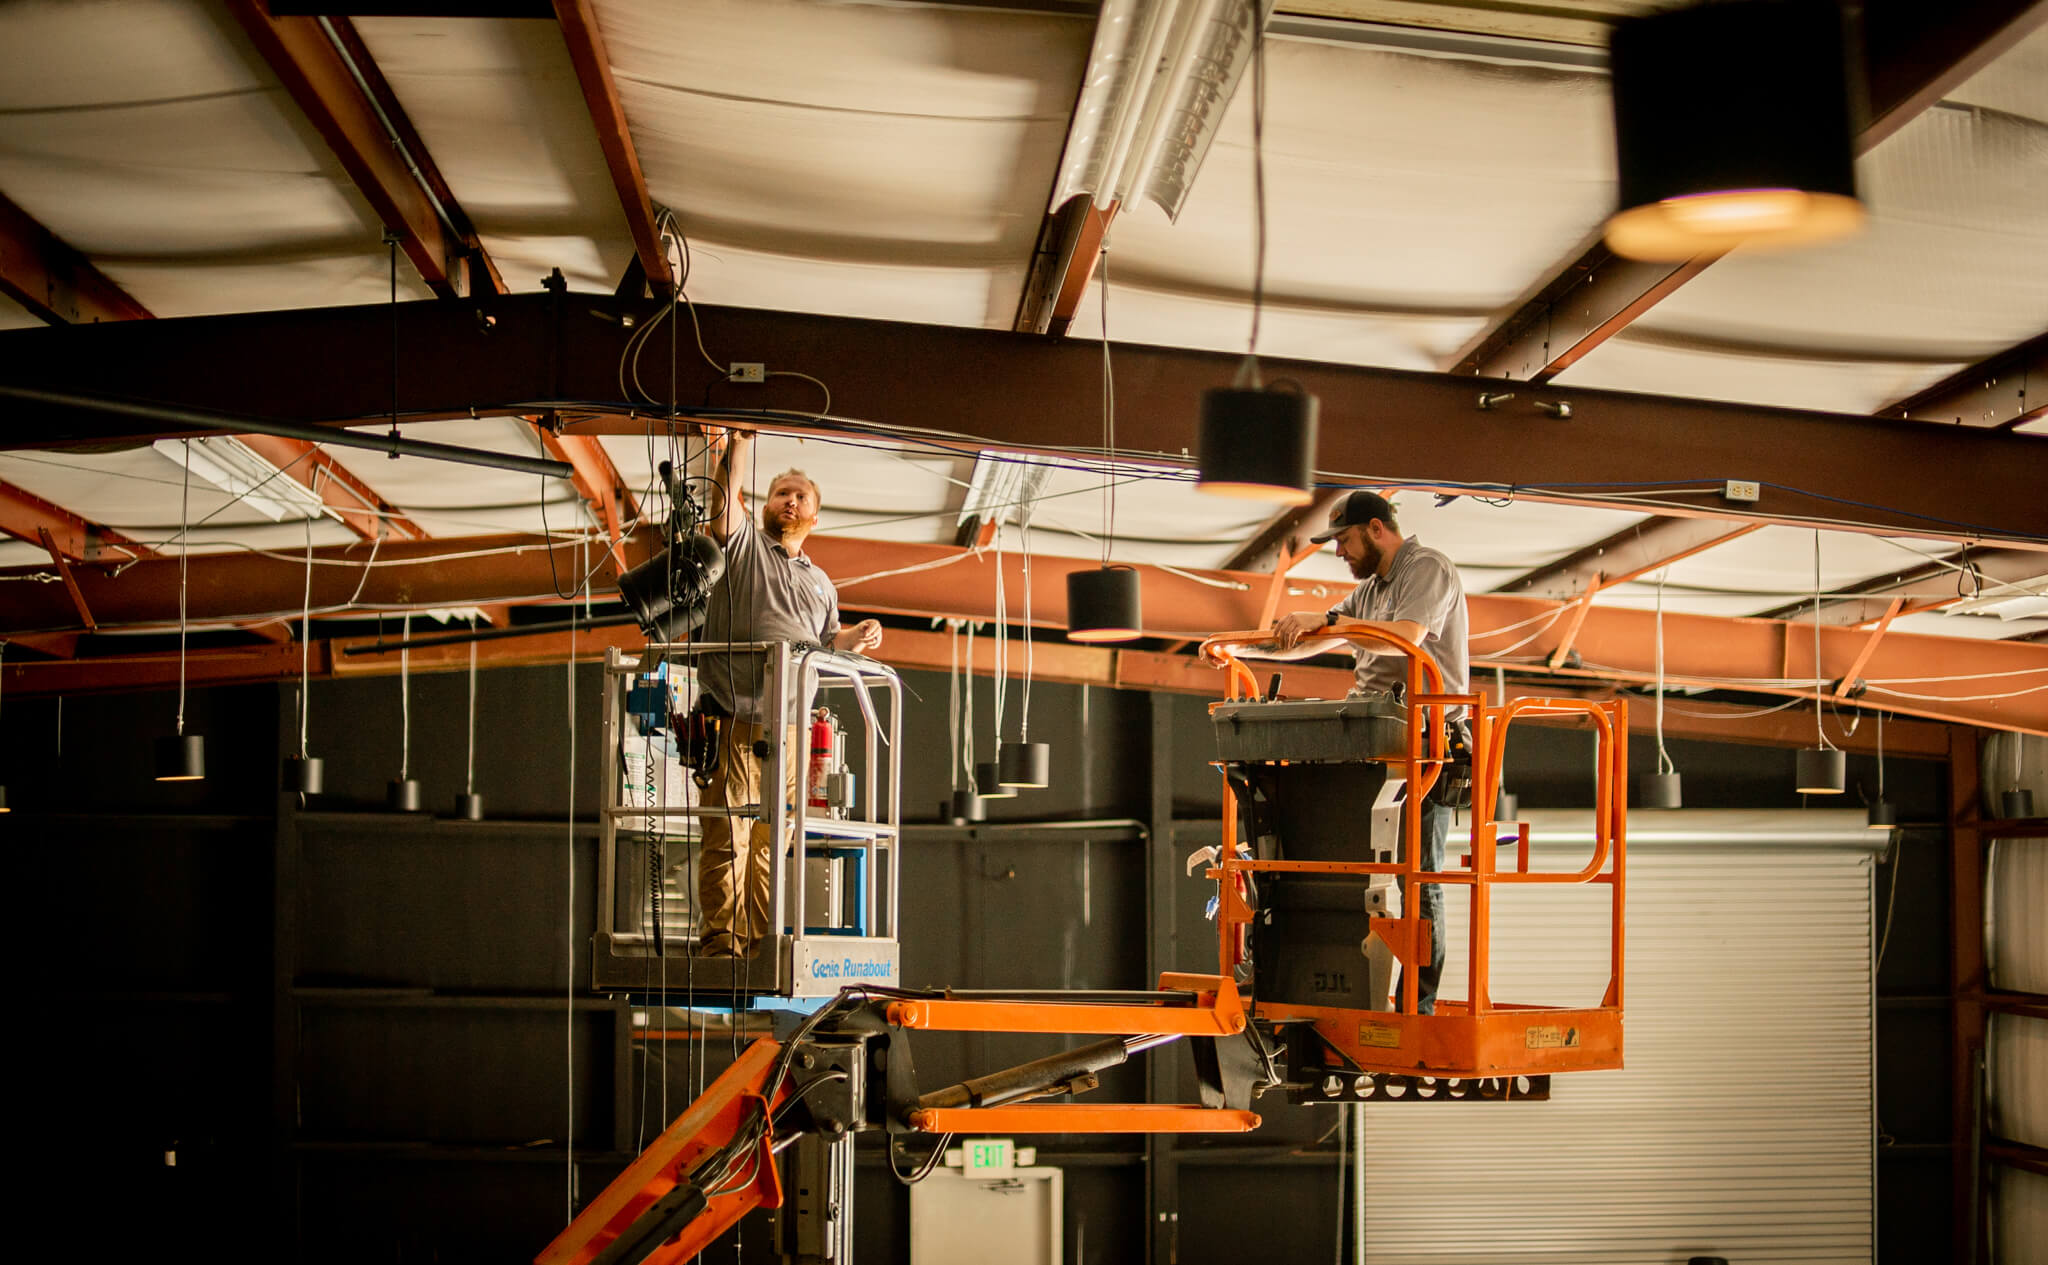 Next Level Integration team on two lifts installing stage lights